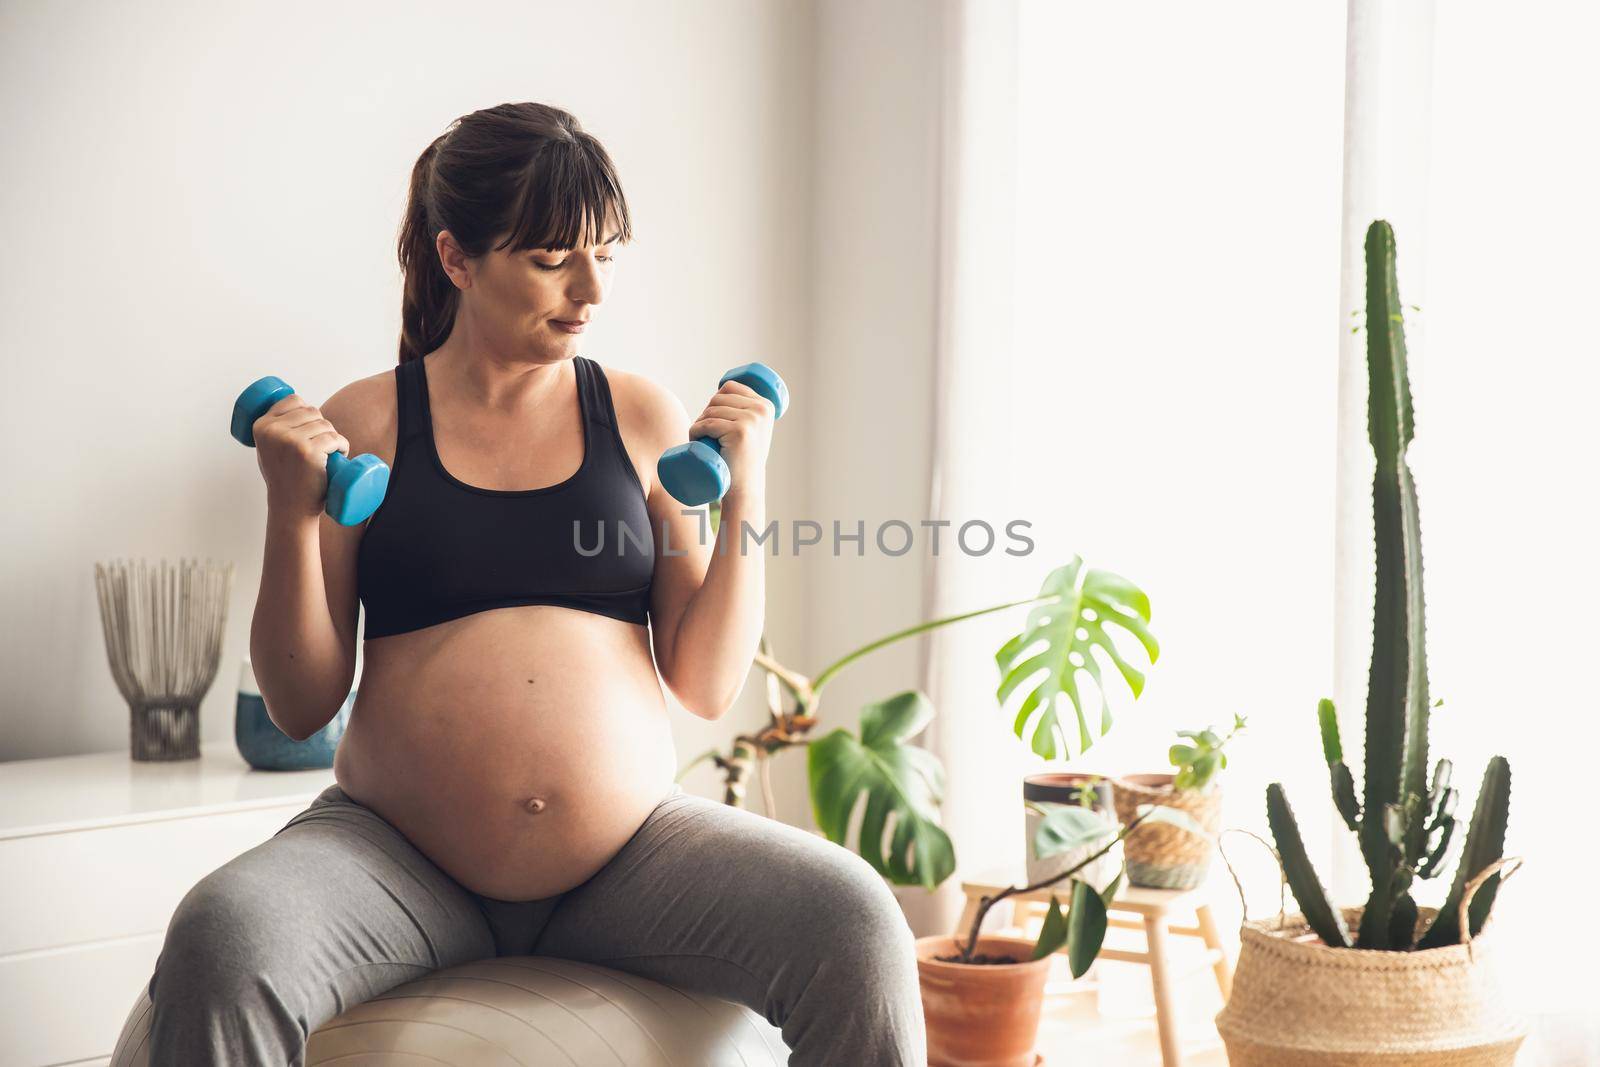 Pregnant woman working out with dumbbells doing strength exercises on a fitball at home. Keeping in good shape while waiting for baby